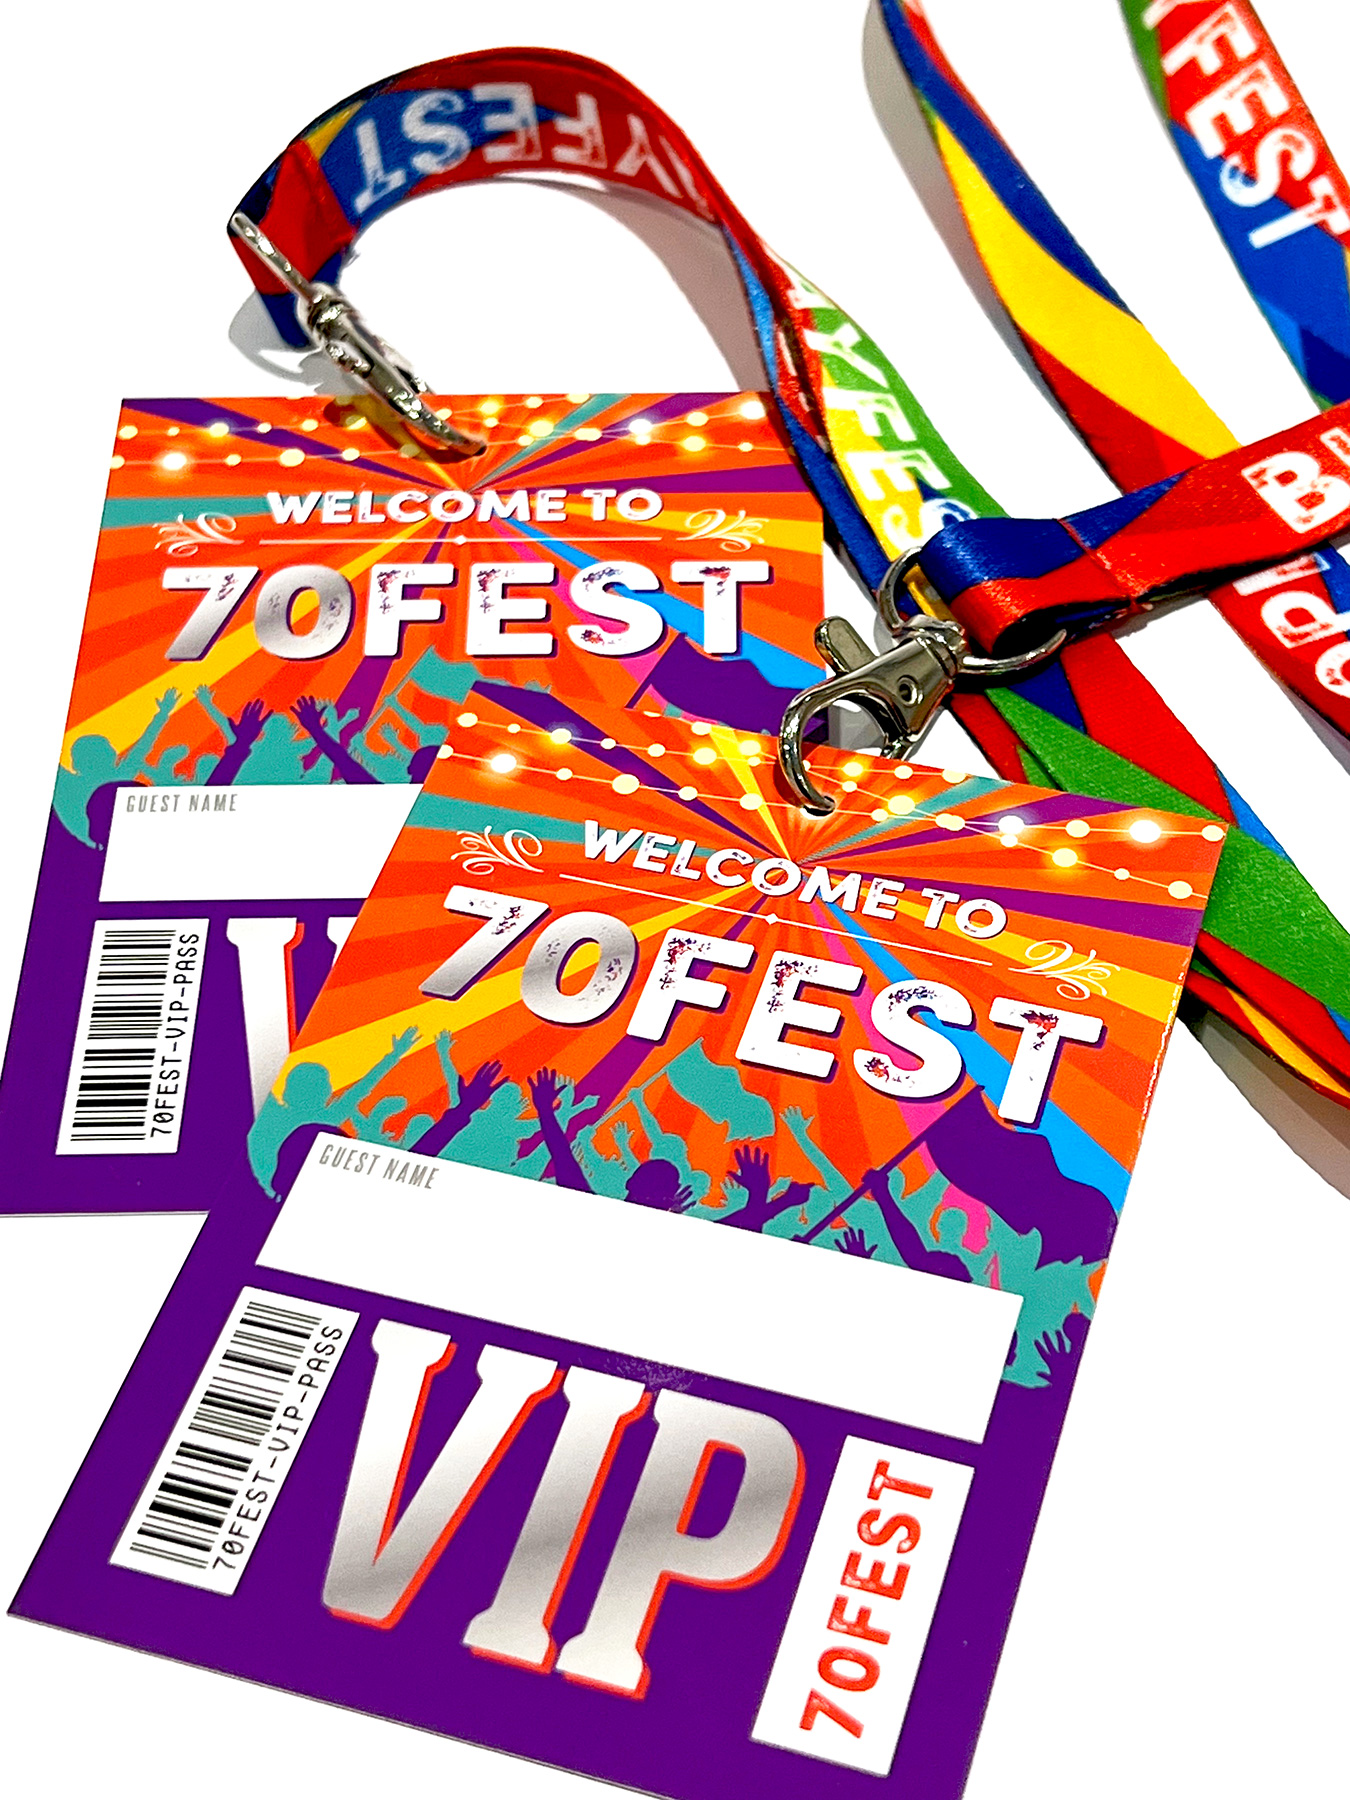 70fest 70th birthday party festival lanyards accessories